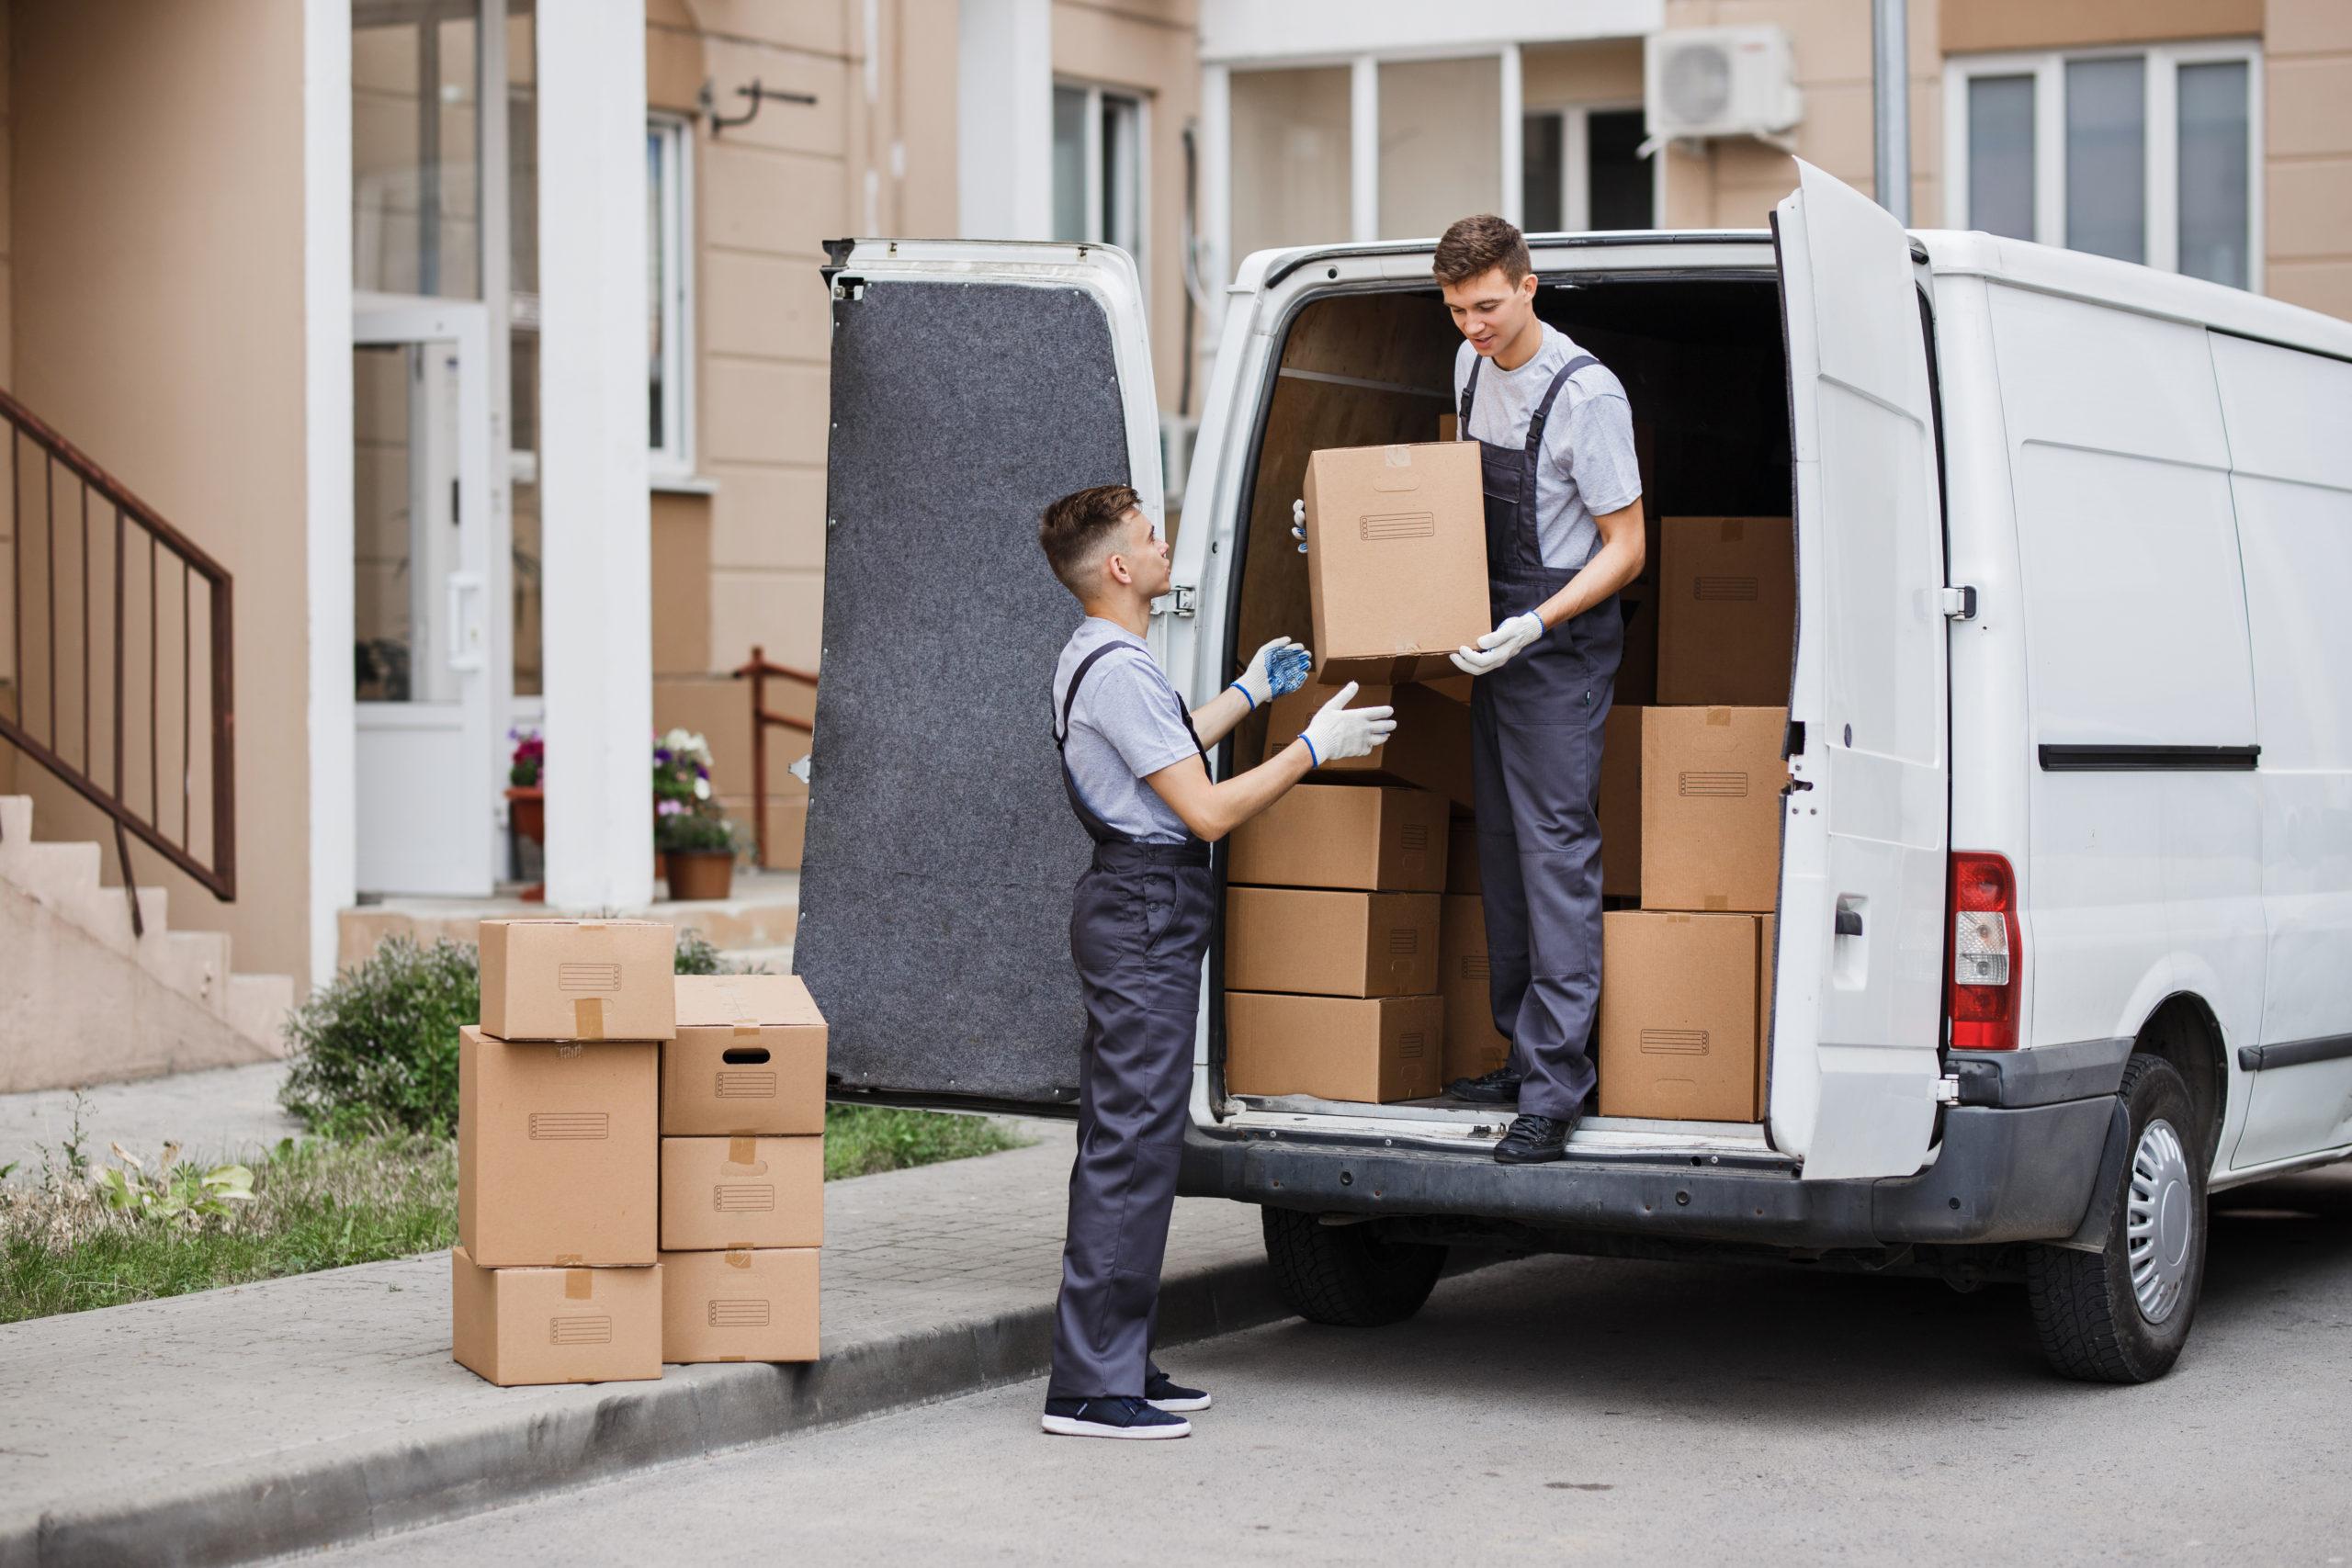 Two young handsome movers wearing uniforms are unloading the van full of boxes.